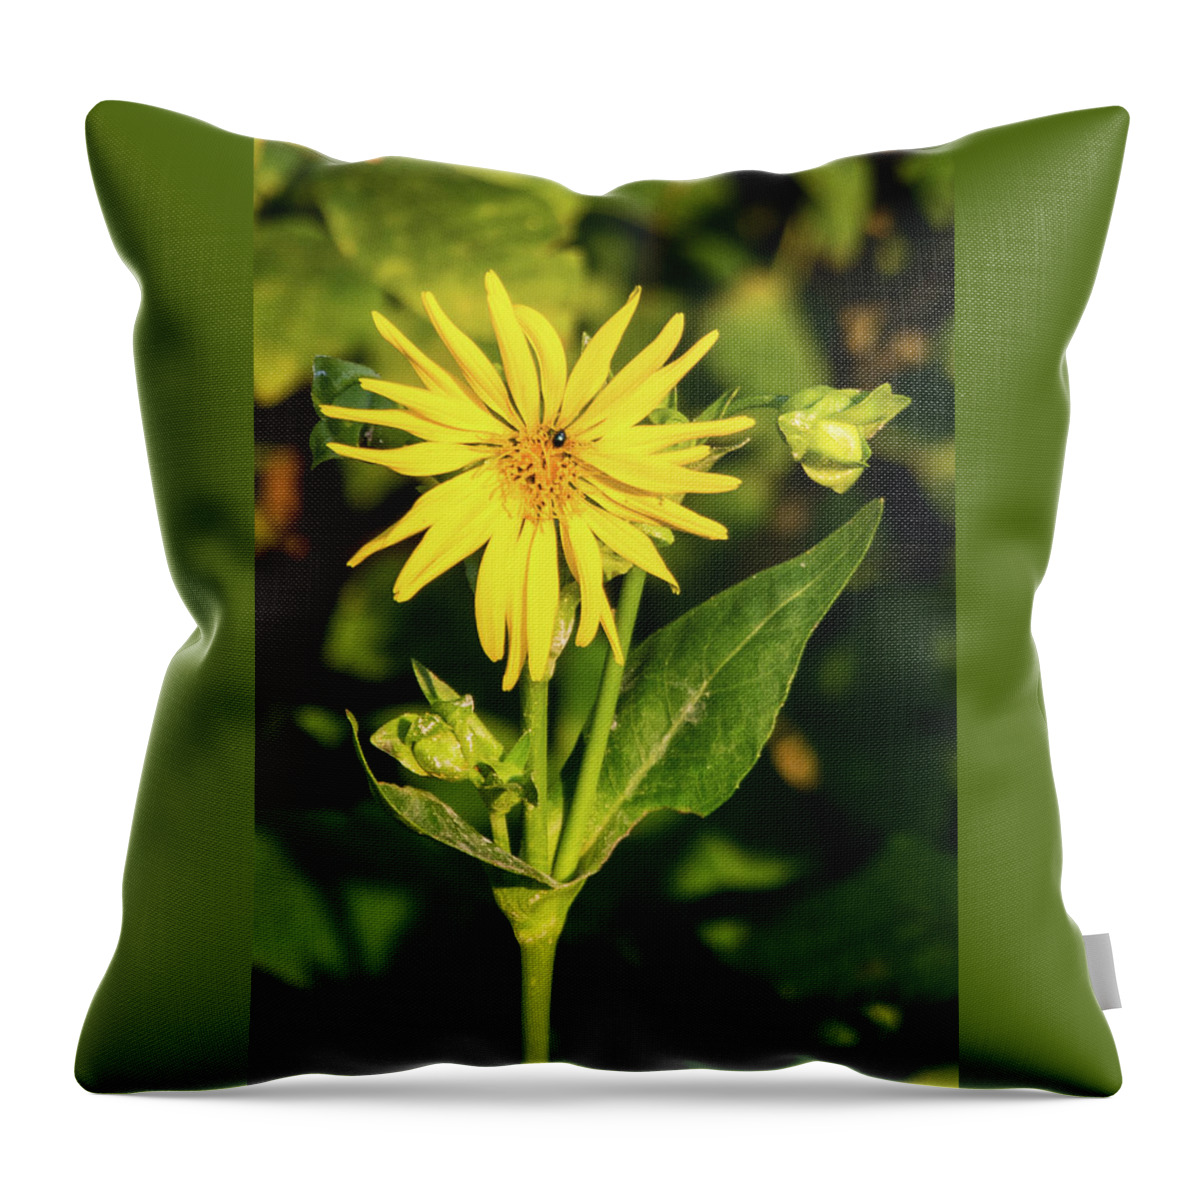 Wildlife Throw Pillow featuring the photograph Sunbathing by John Benedict